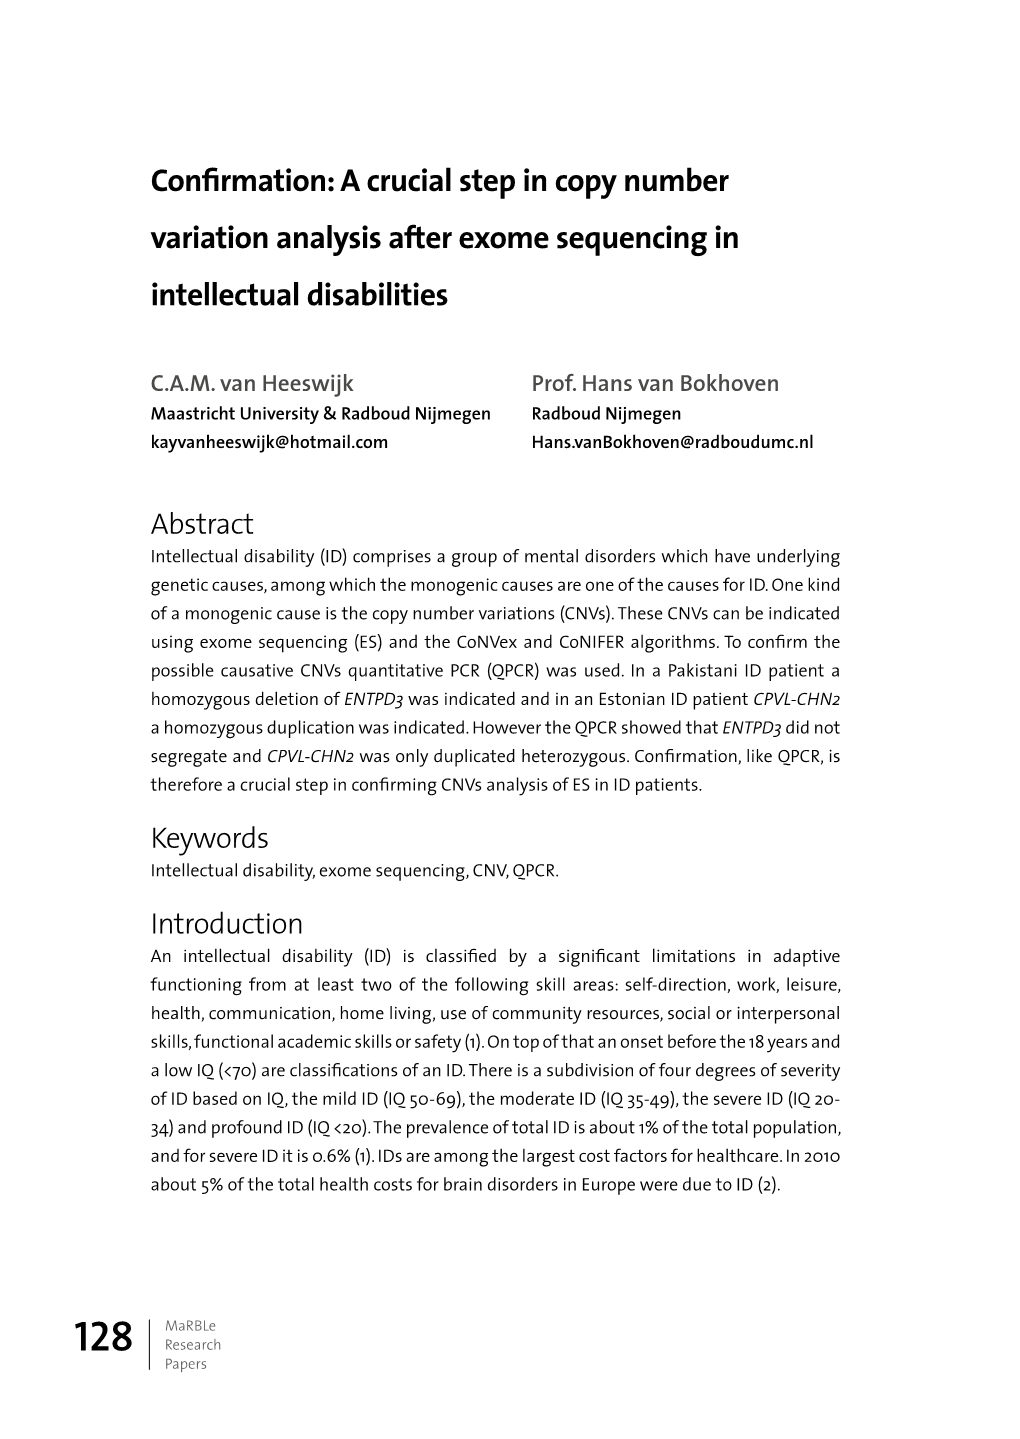 A Crucial Step in Copy Number Variation Analysis After Exome Sequencing in Intellectual Disabilities